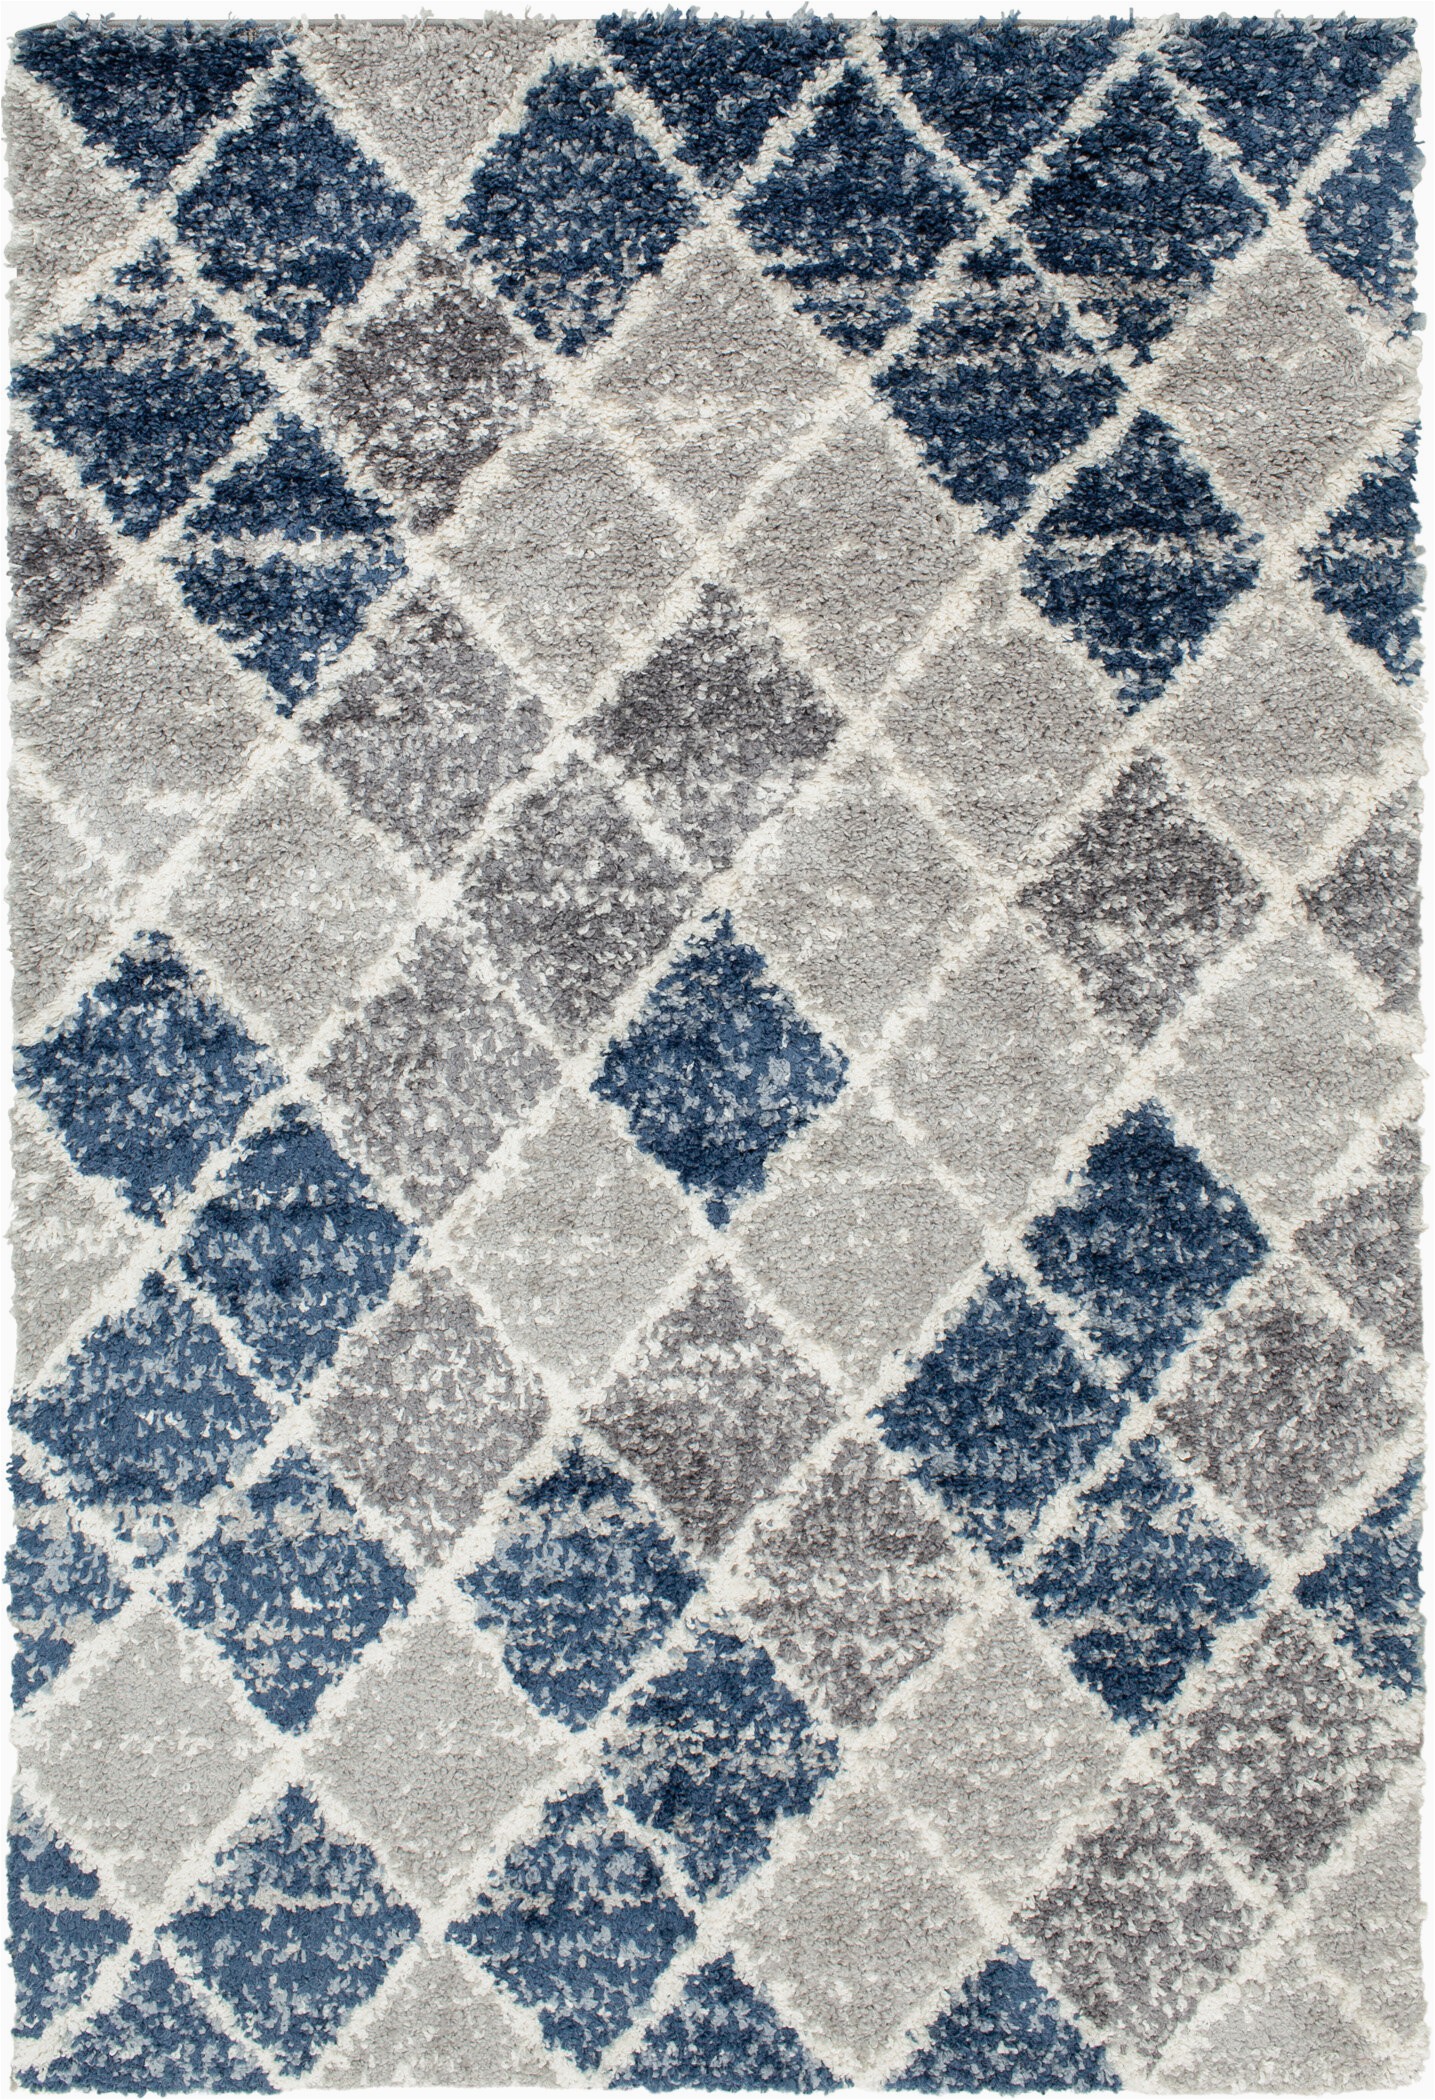 Blue Grey Shaggy Rug Union Rustic Lux Blue and Grey Woven Shag area Rug & Reviews